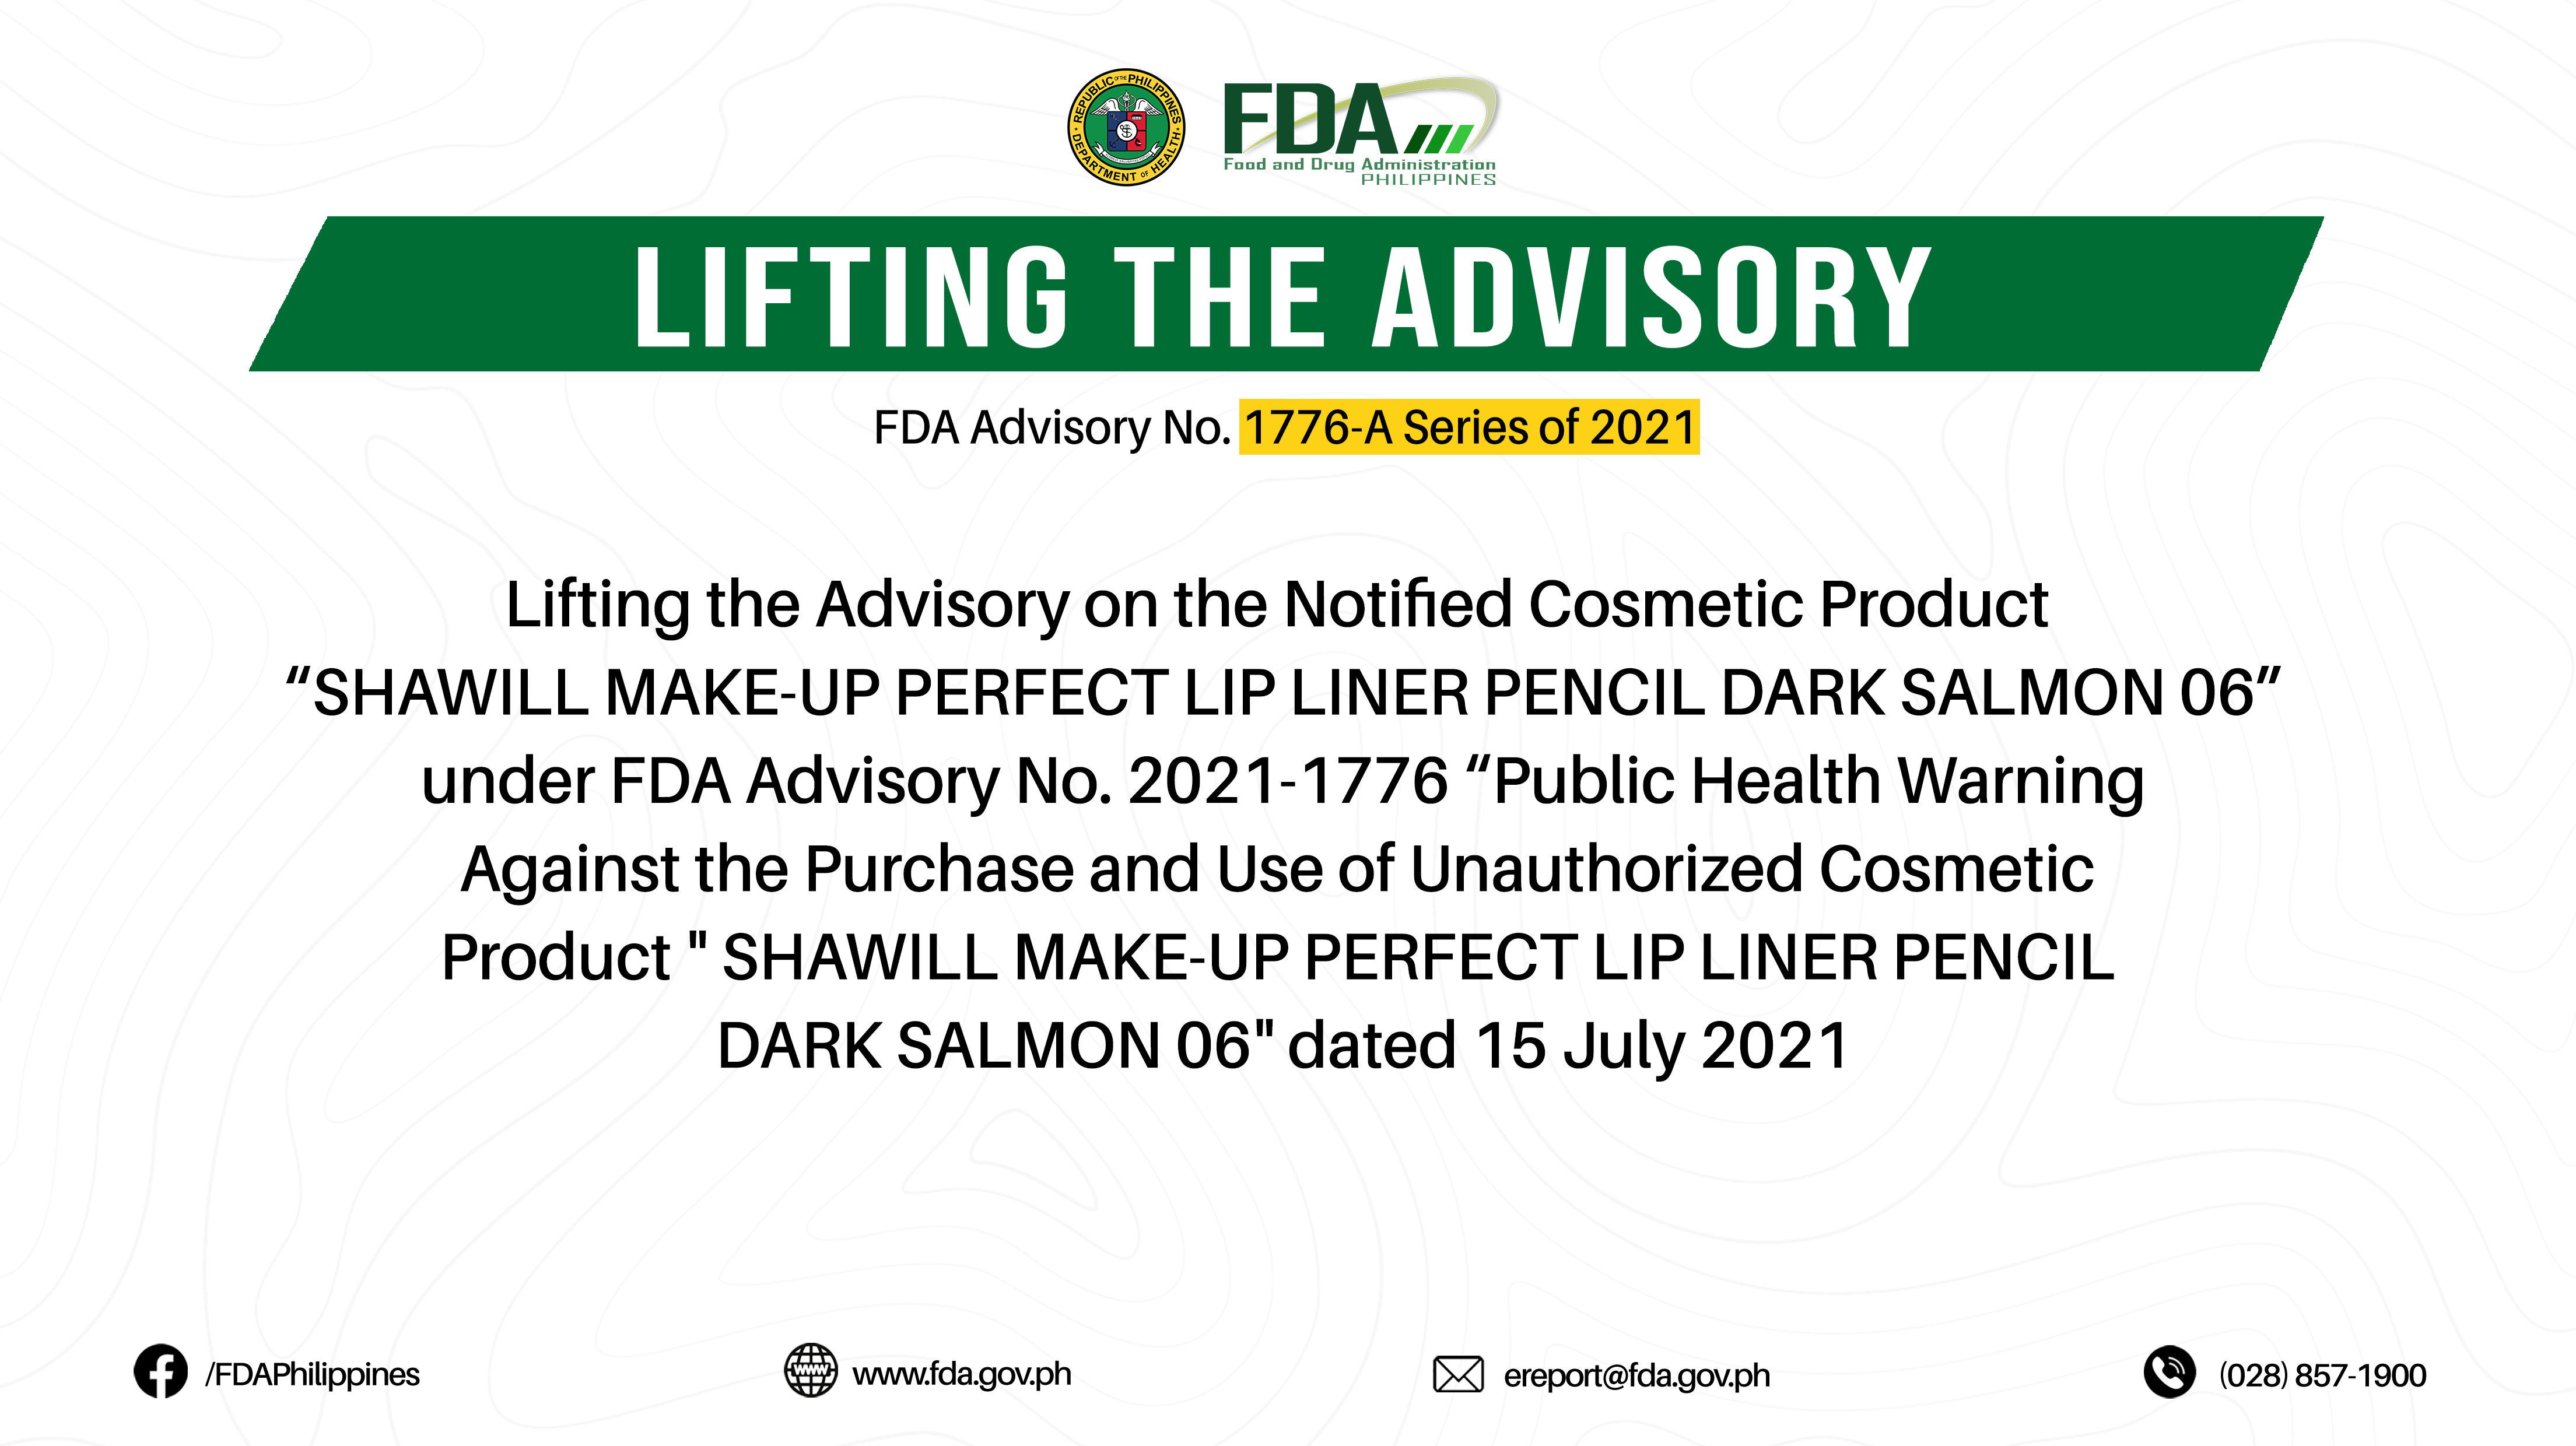 FDA Advisory No.2022-1776-A || Lifting the Advisory on the Notified Cosmetic Product “SHAWILL MAKE-UP PERFECT LIP LINER PENCIL DARK SALMON 06” under FDA Advisory No. 2021-1776 “Public Health Warning Against the Purchase and Use of Unauthorized Cosmetic Product ” SHAWILL MAKE-UP PERFECT LIP LINER PENCIL DARK SALMON 06″ dated 15 July 2021